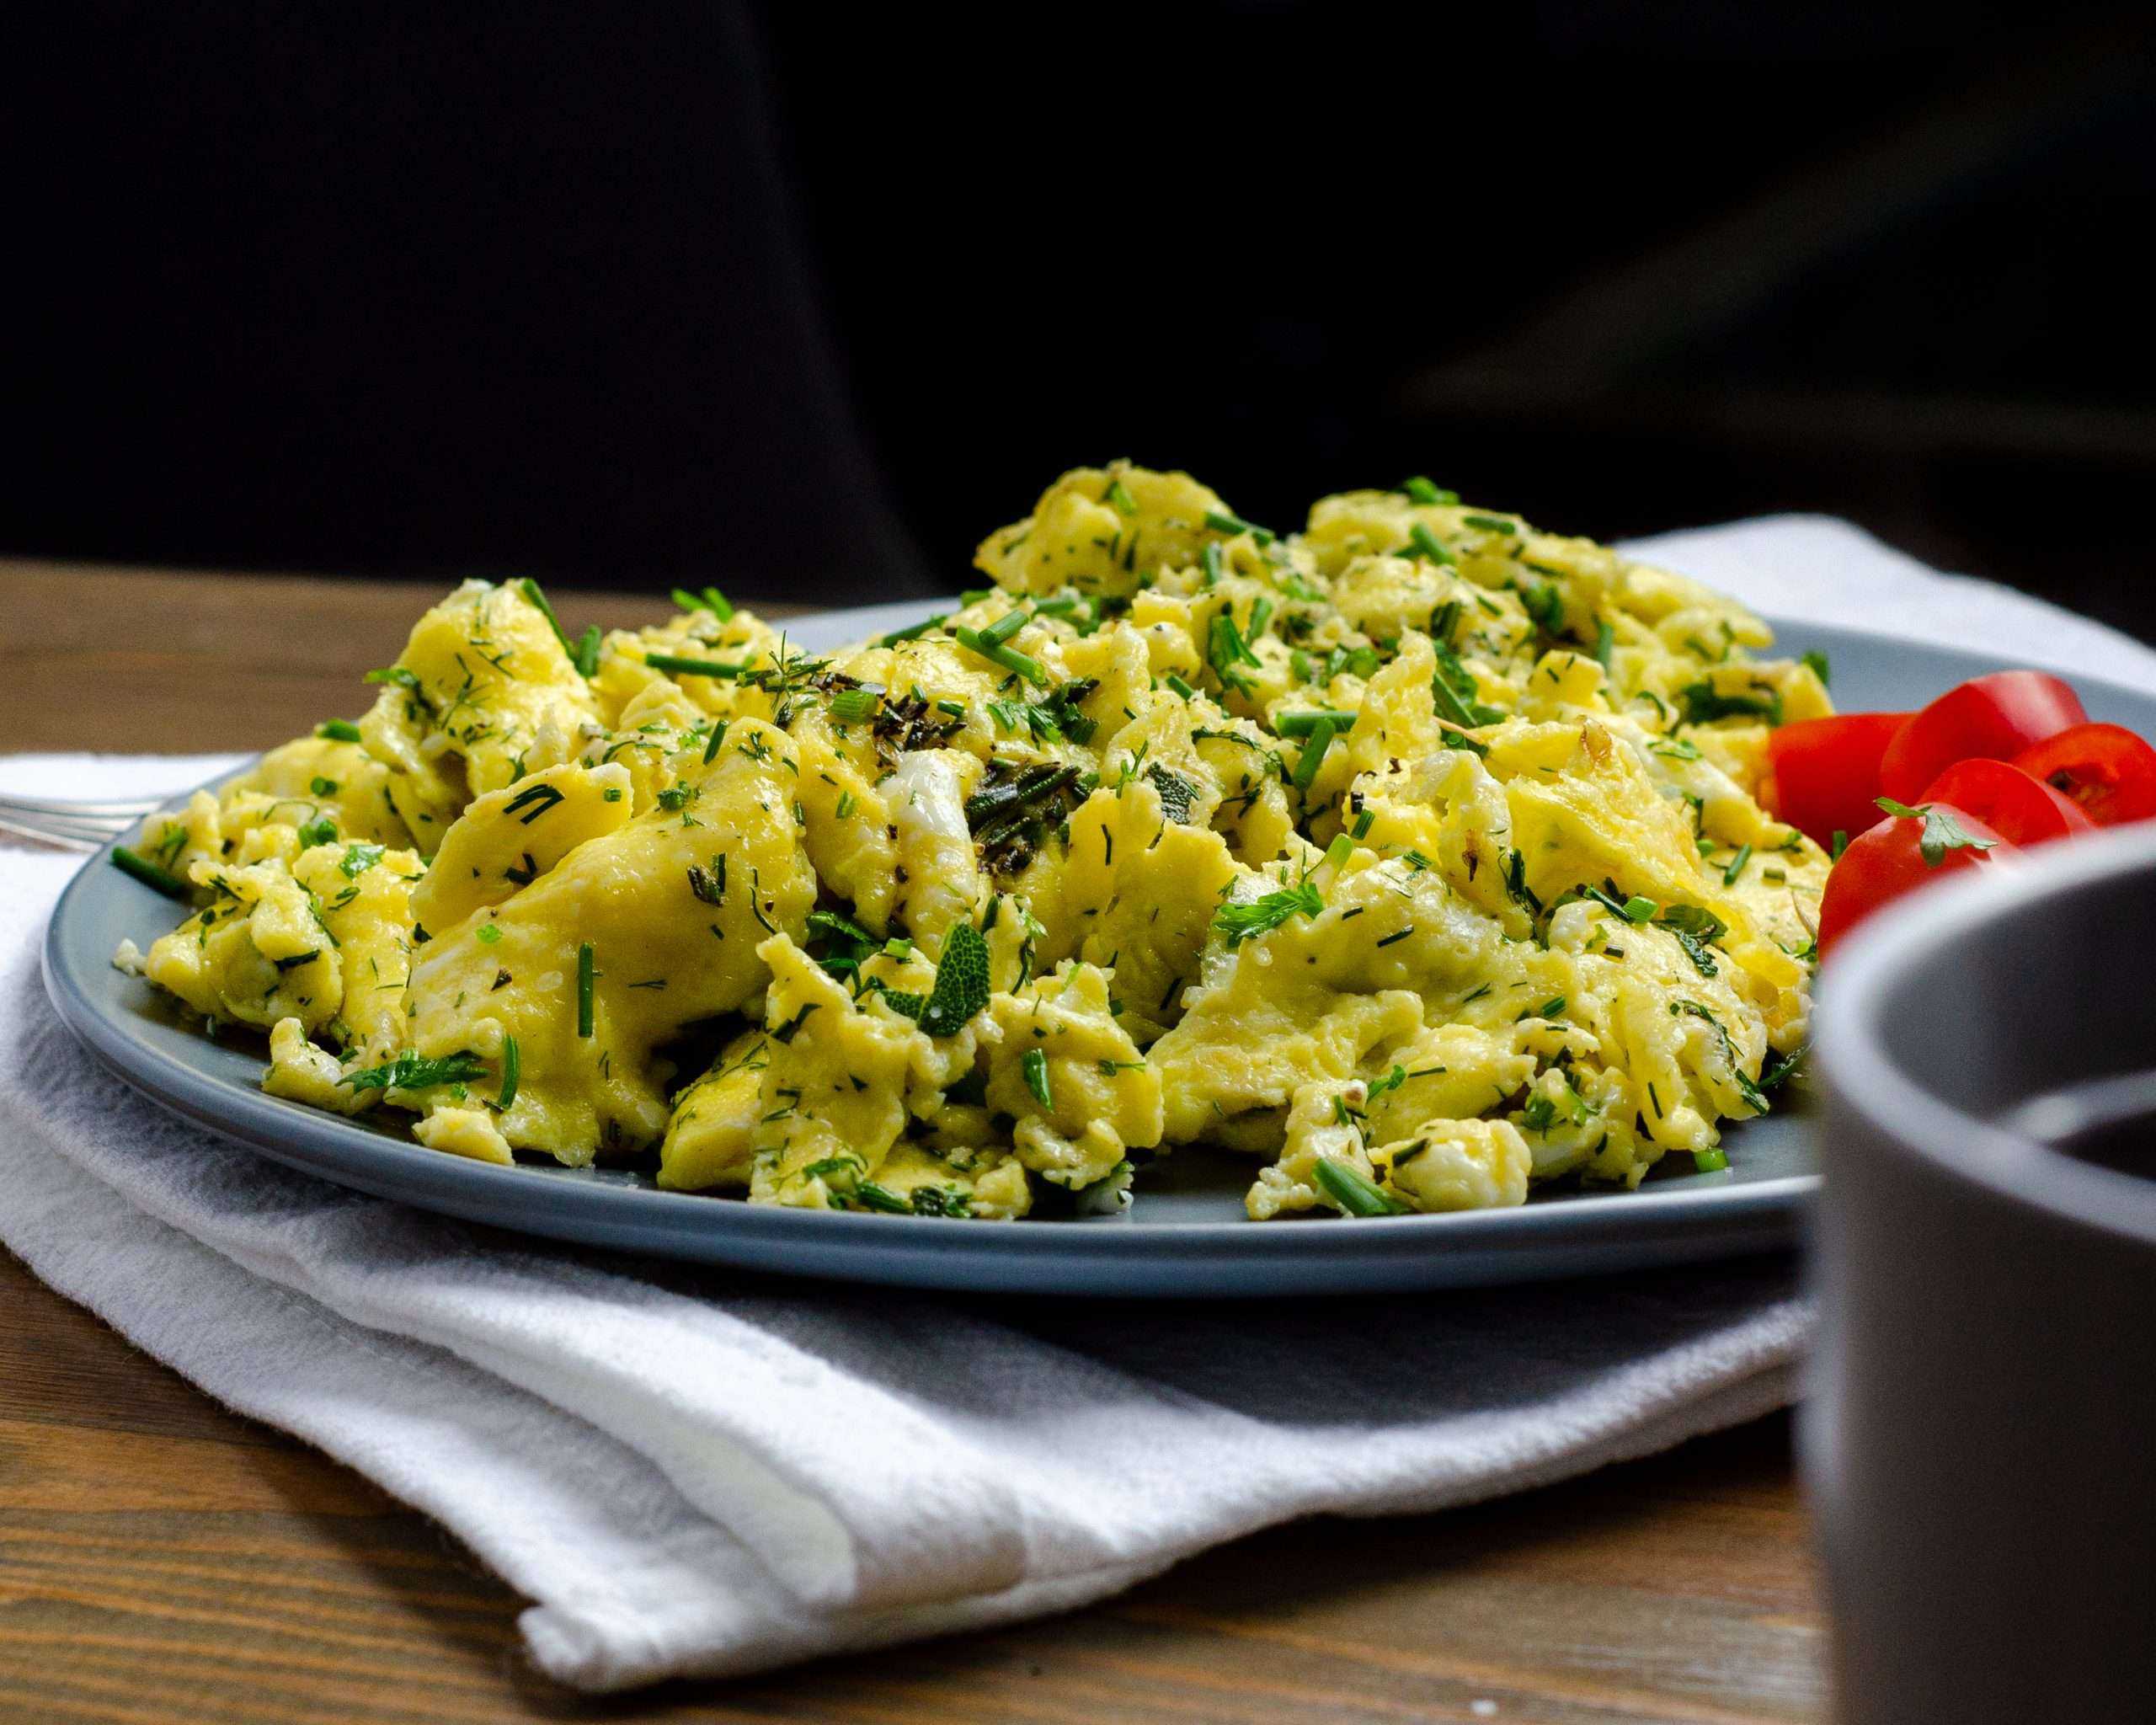 Flavourfull Herby Scrambled Eggs with coffee and tomatoes